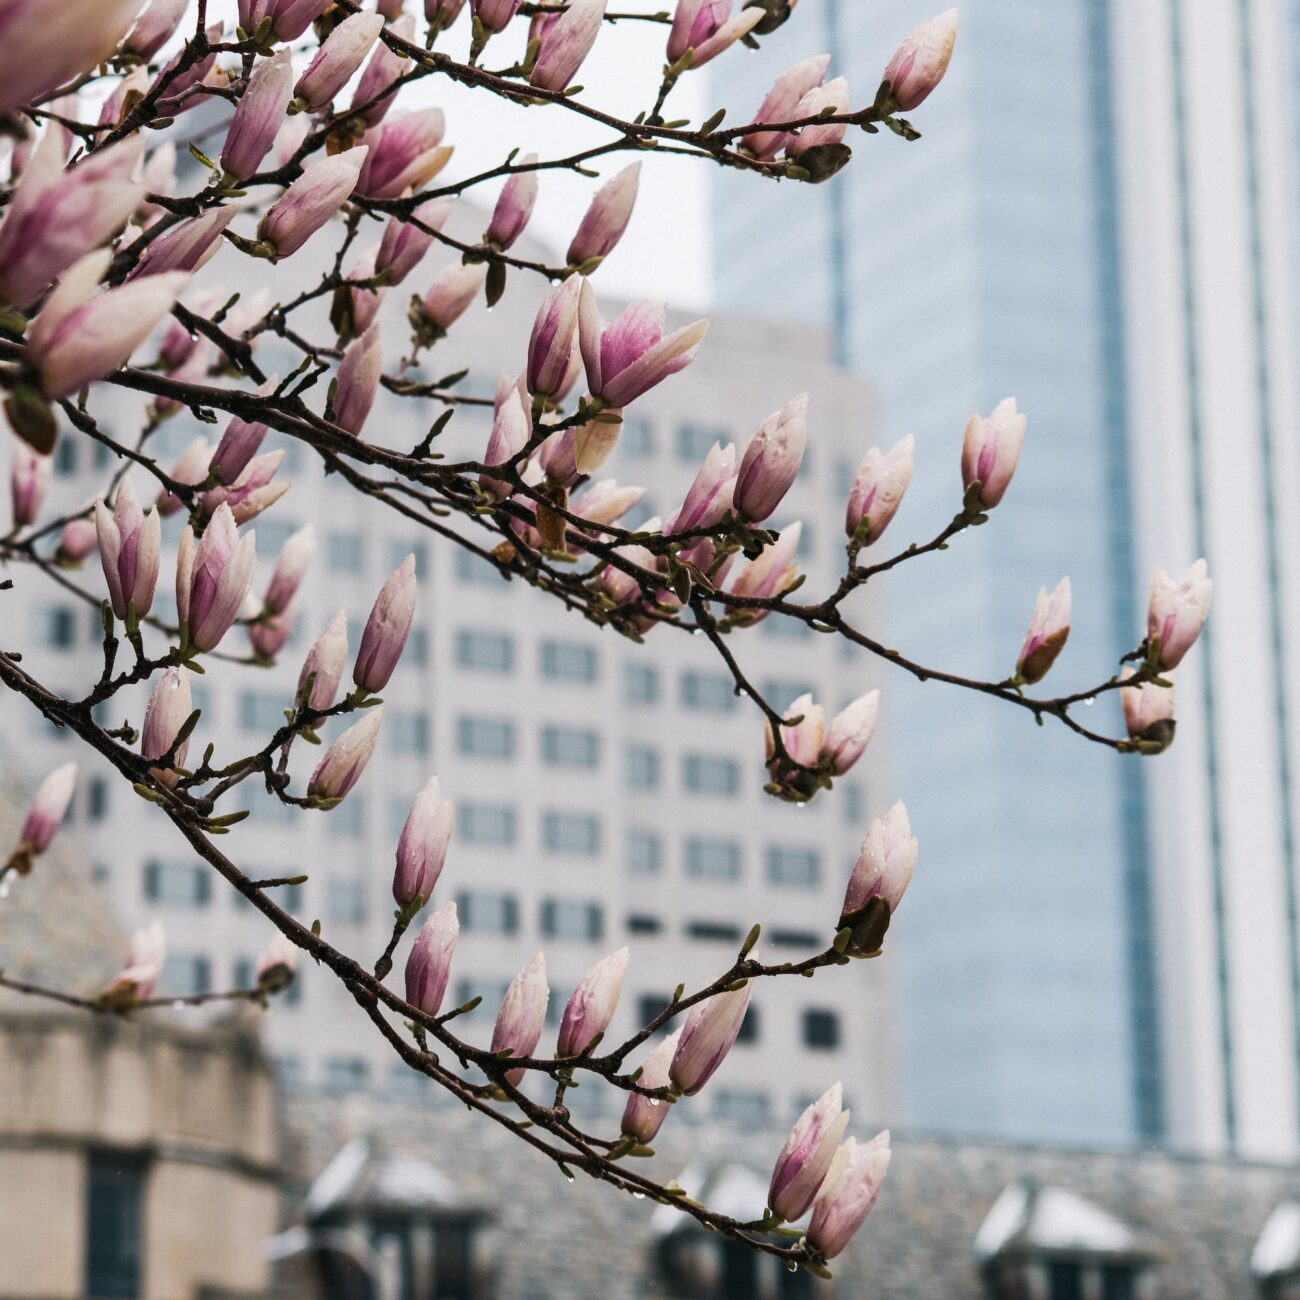 Tree branch with pink and white blossoms with tall city buildings in the background.